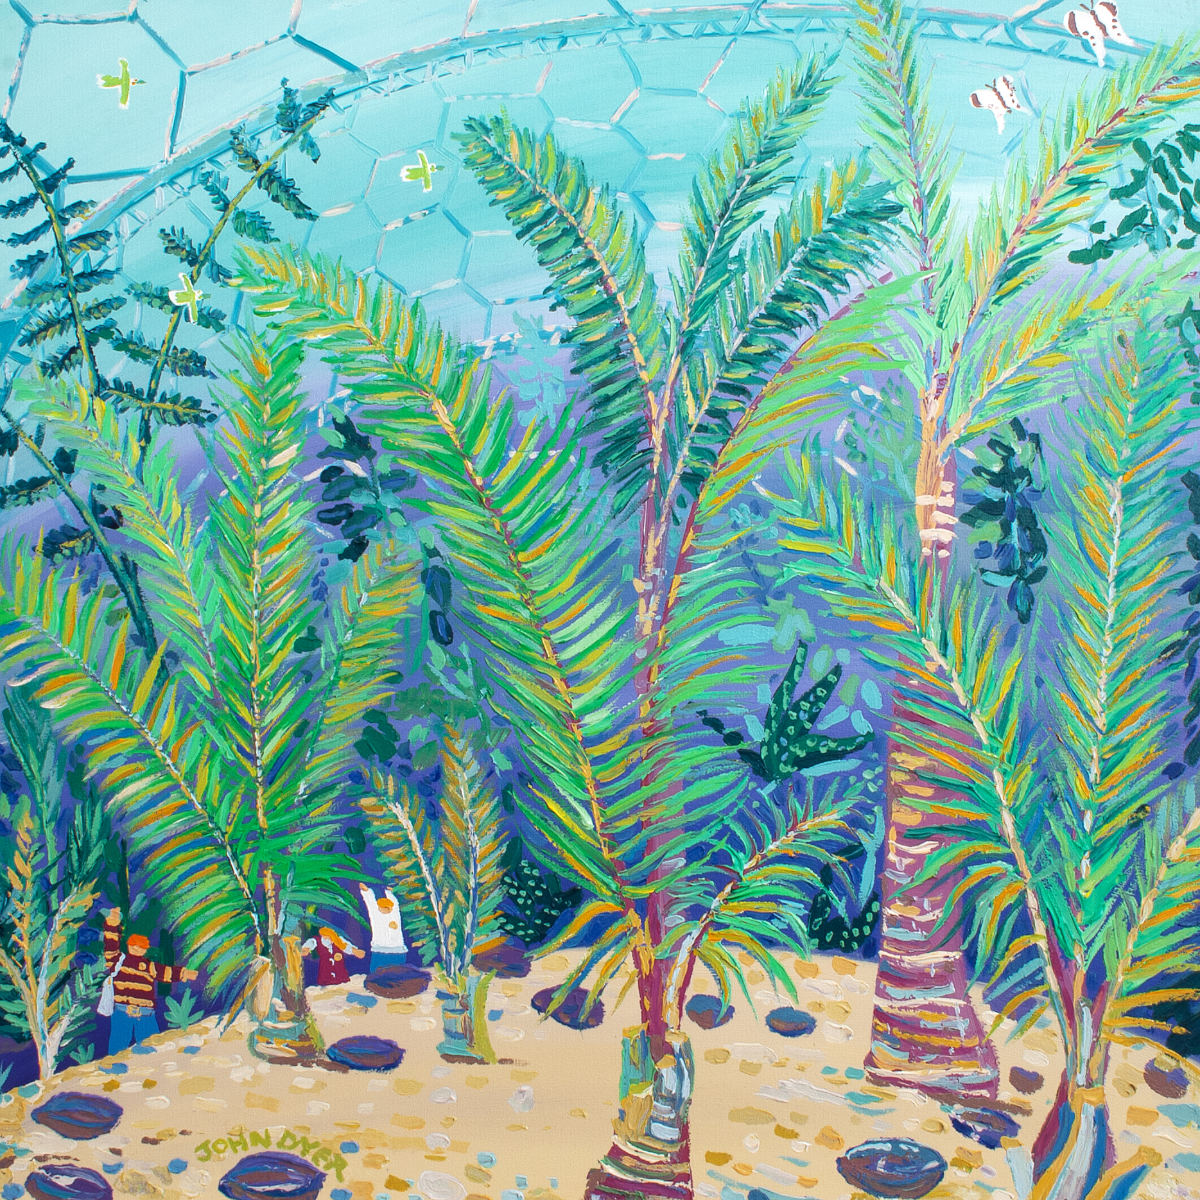 Original Garden Painting by John Dyer. 'Palm Beach at the Eden Project'. Cornwall Art Gallery